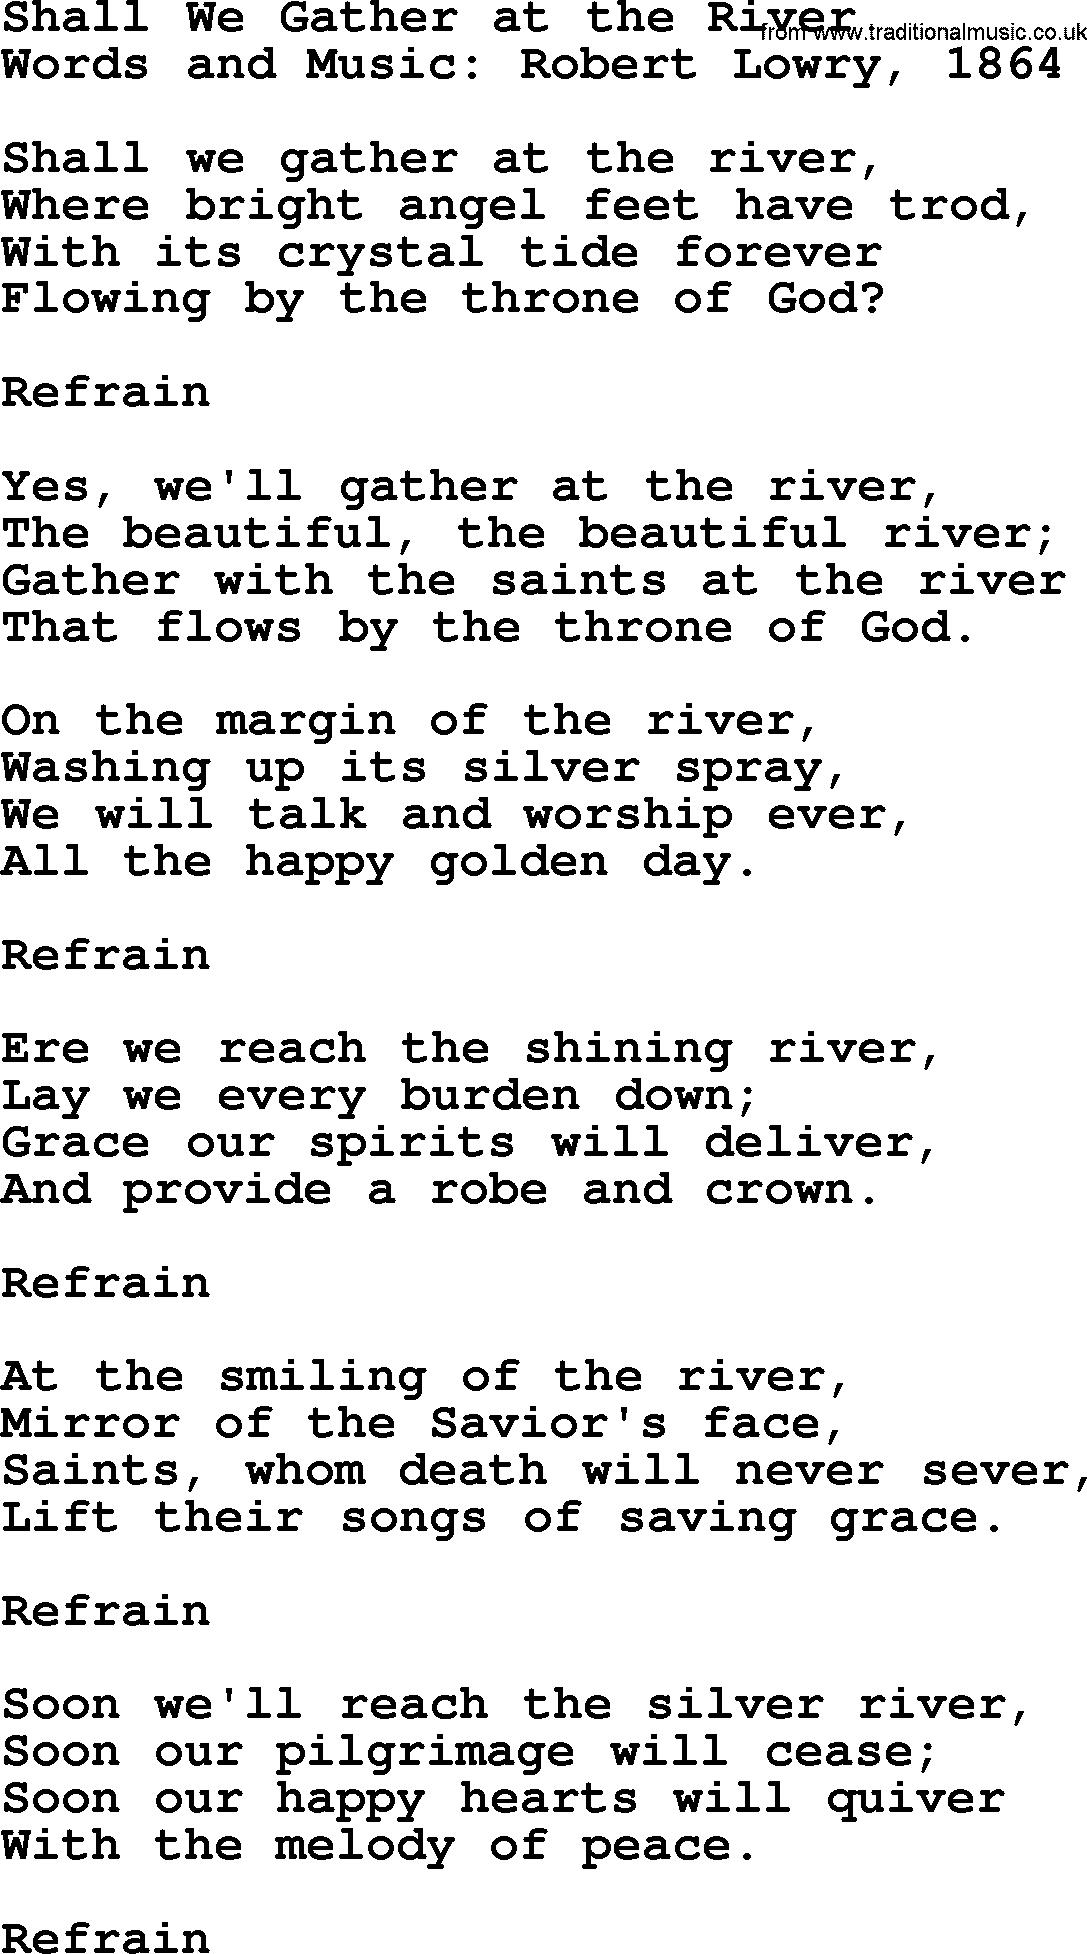 100+ Christian Funeral Hymns collection, Hymn: Shall We Gather at the River, lyrics and PDF